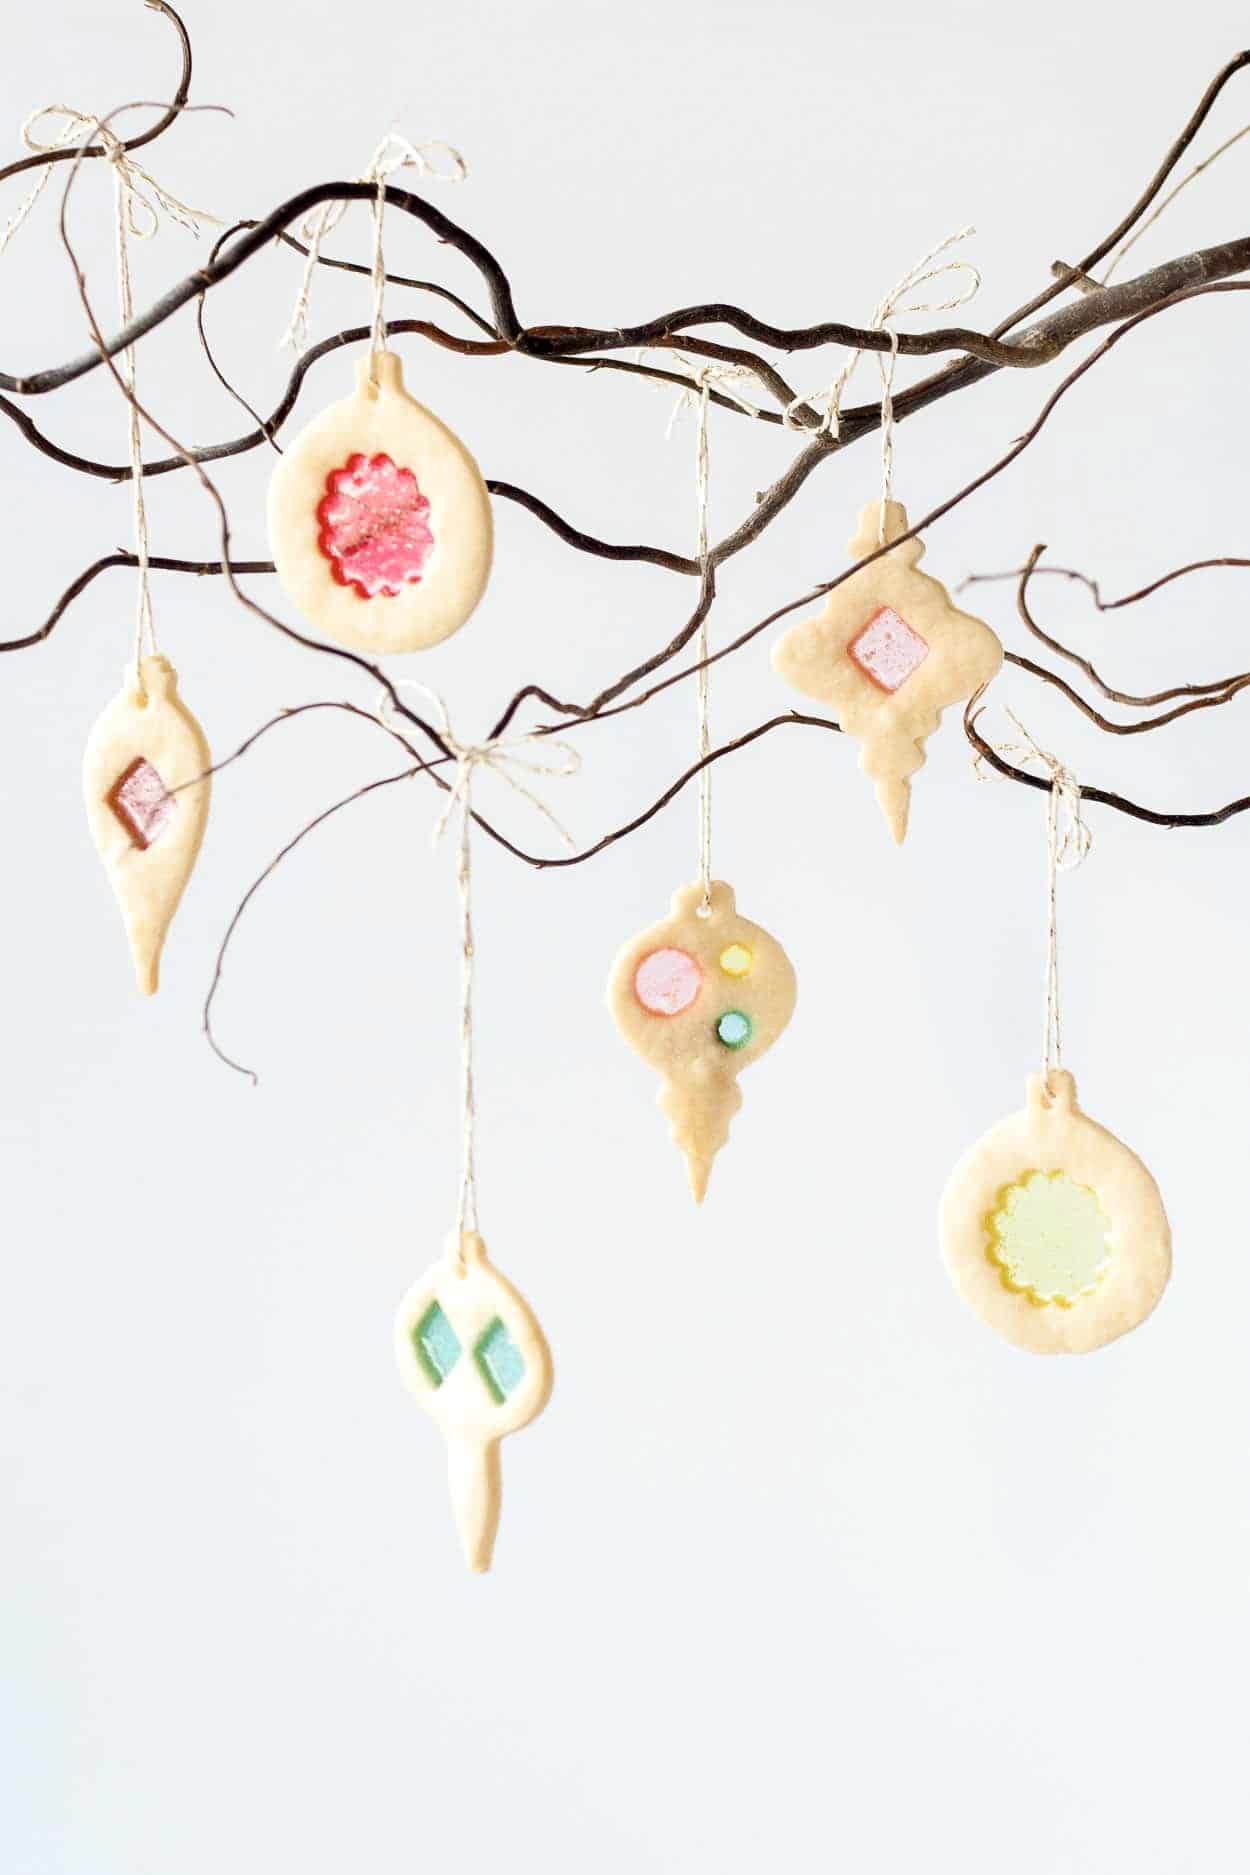 Stained glass cookie ornaments hanging from a tree branch.